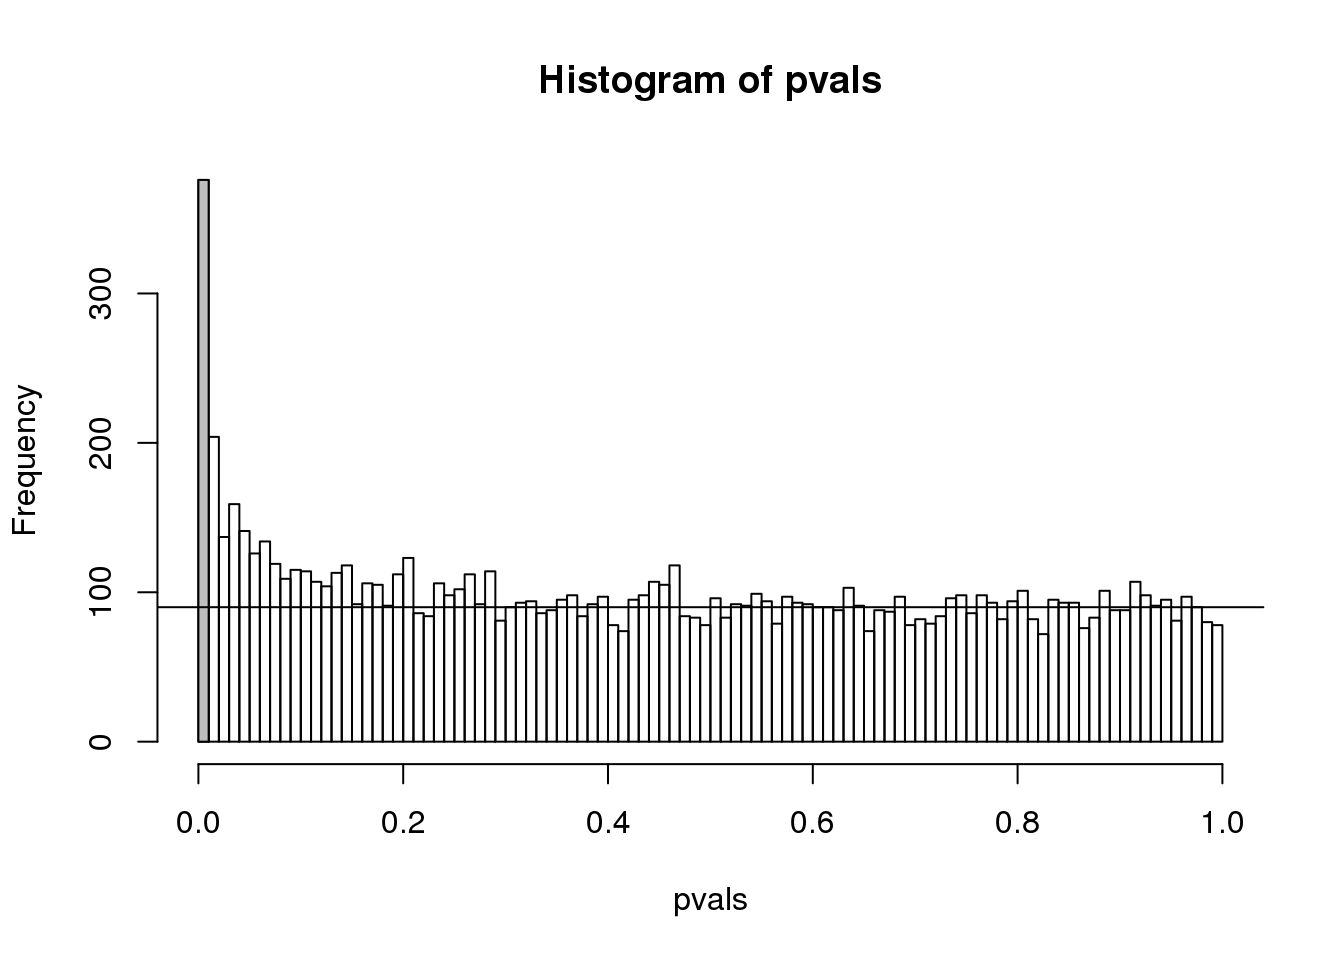 Histogram of p-values with breaks at every 0.01. Monte Carlo simulation was used to generate data with m_1 genes having differences between groups.